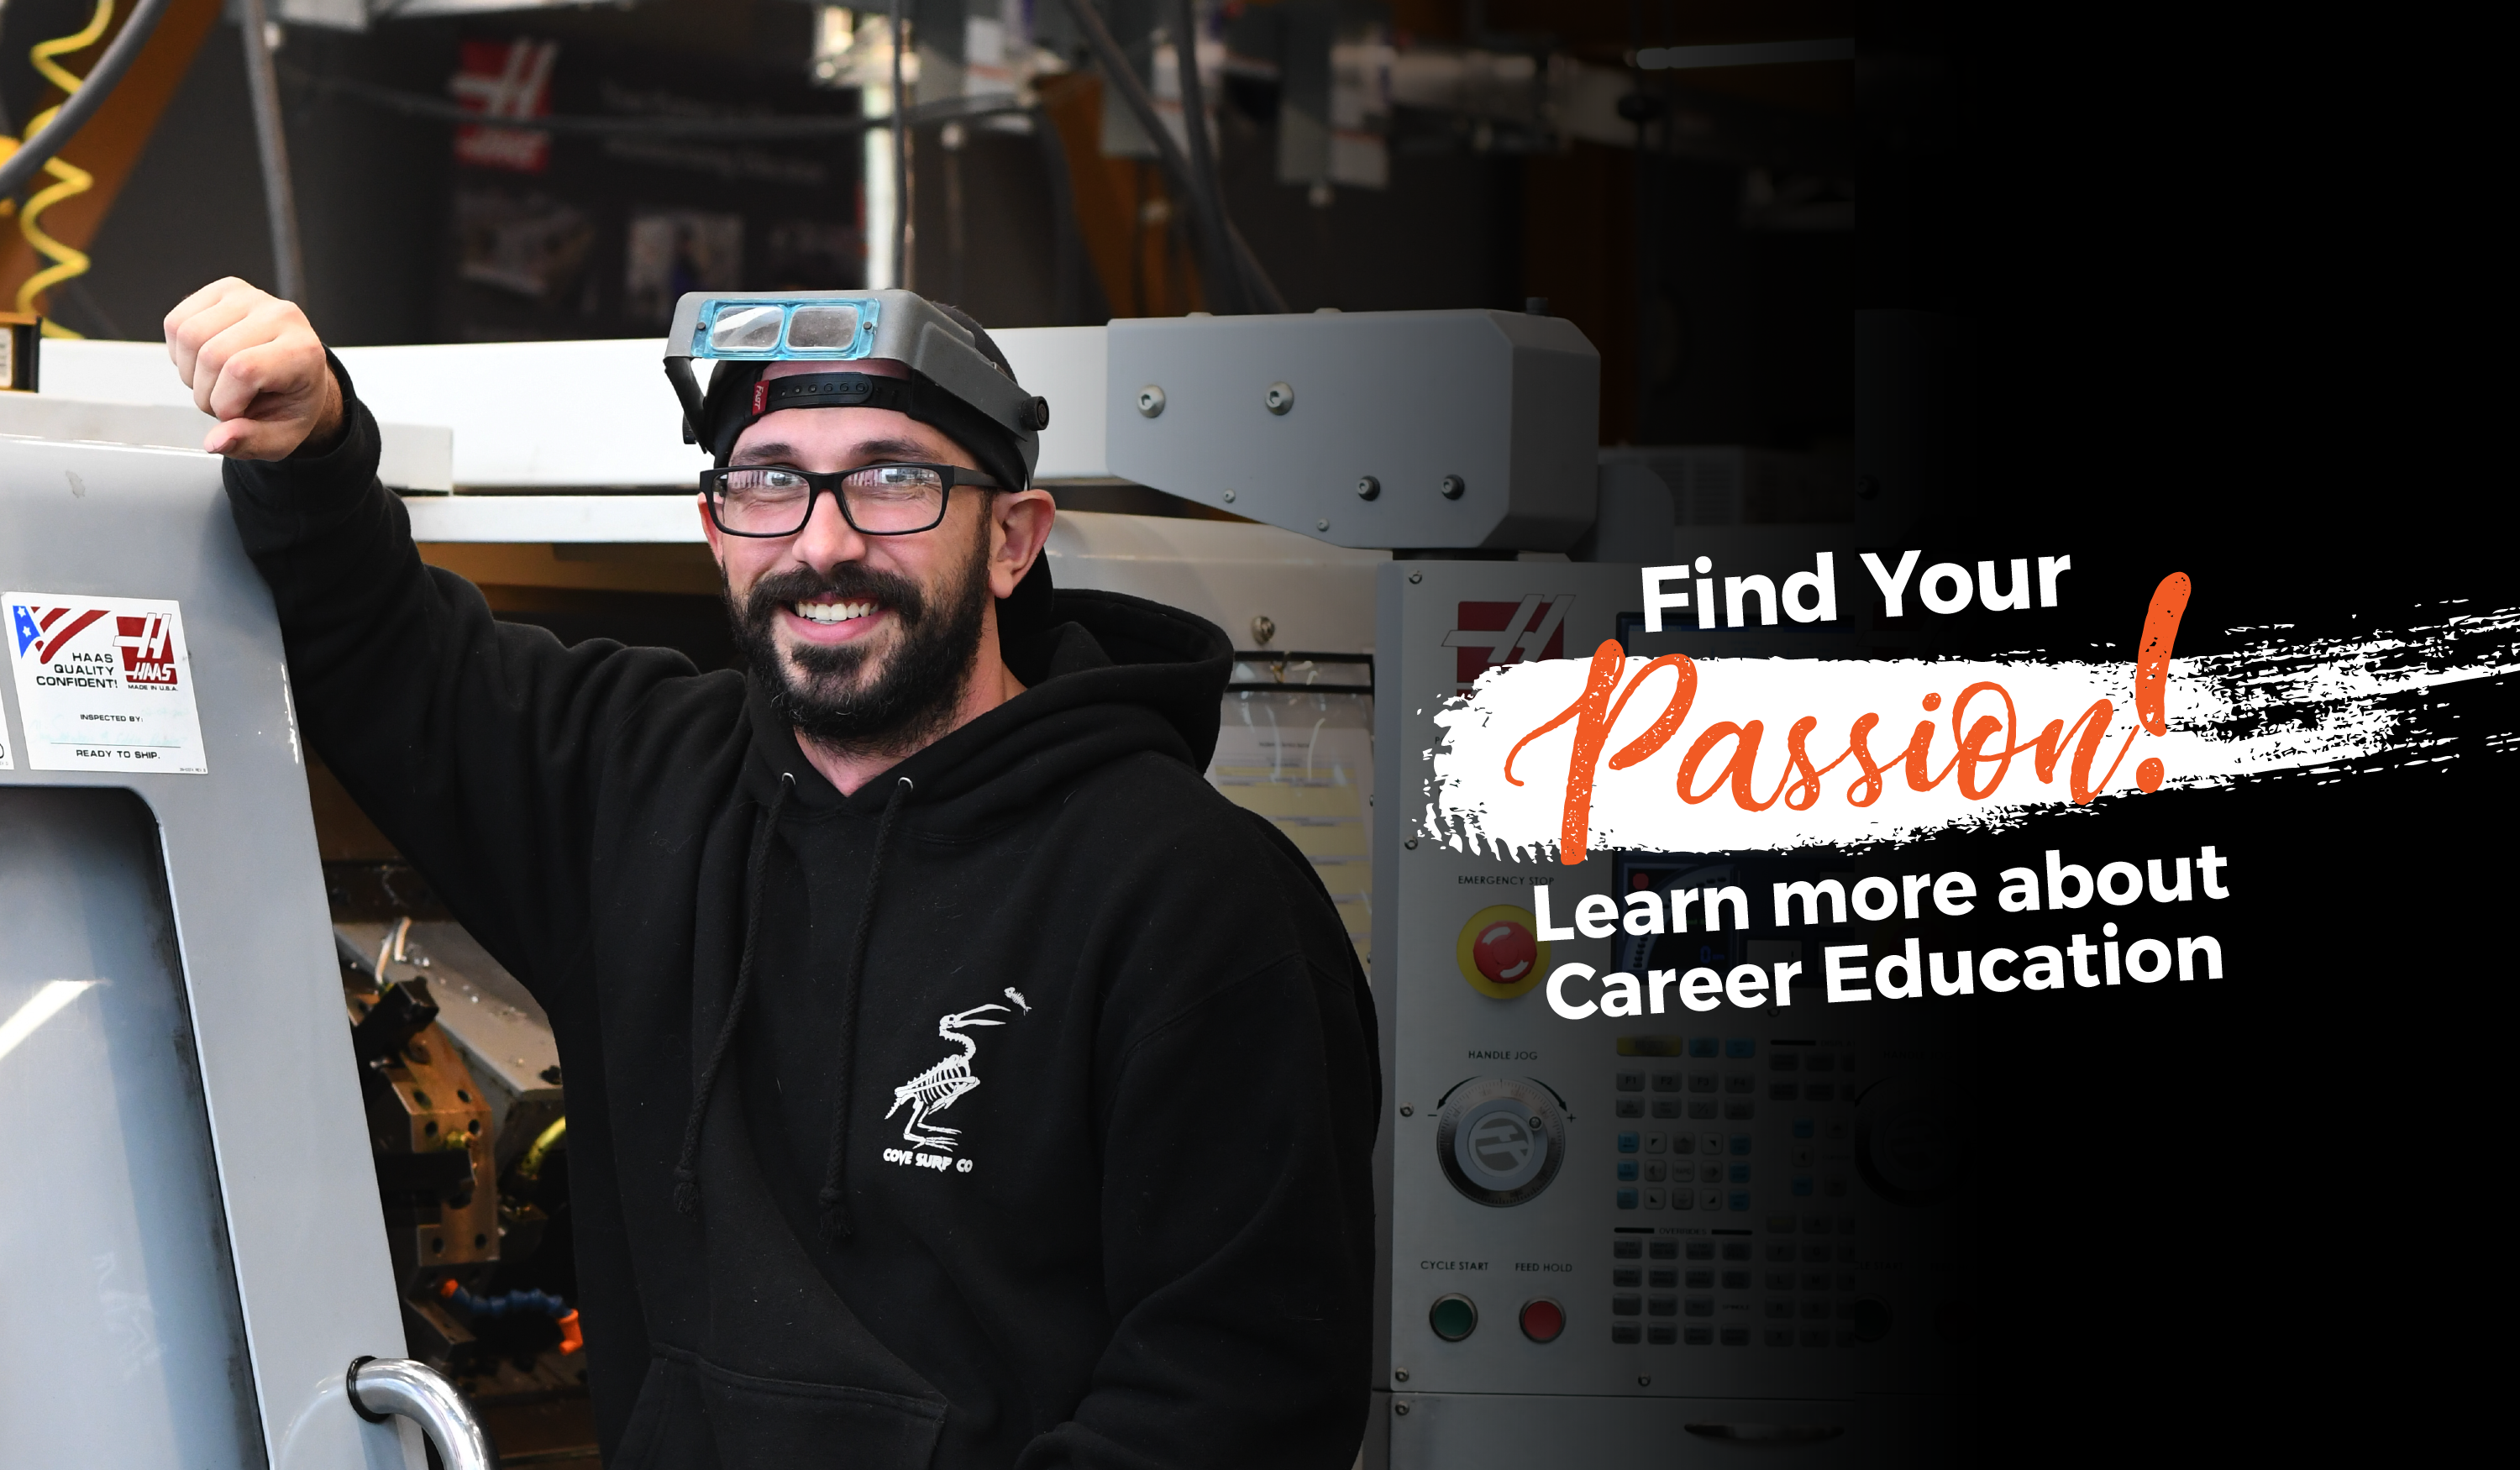 find your passion. learn more about career education